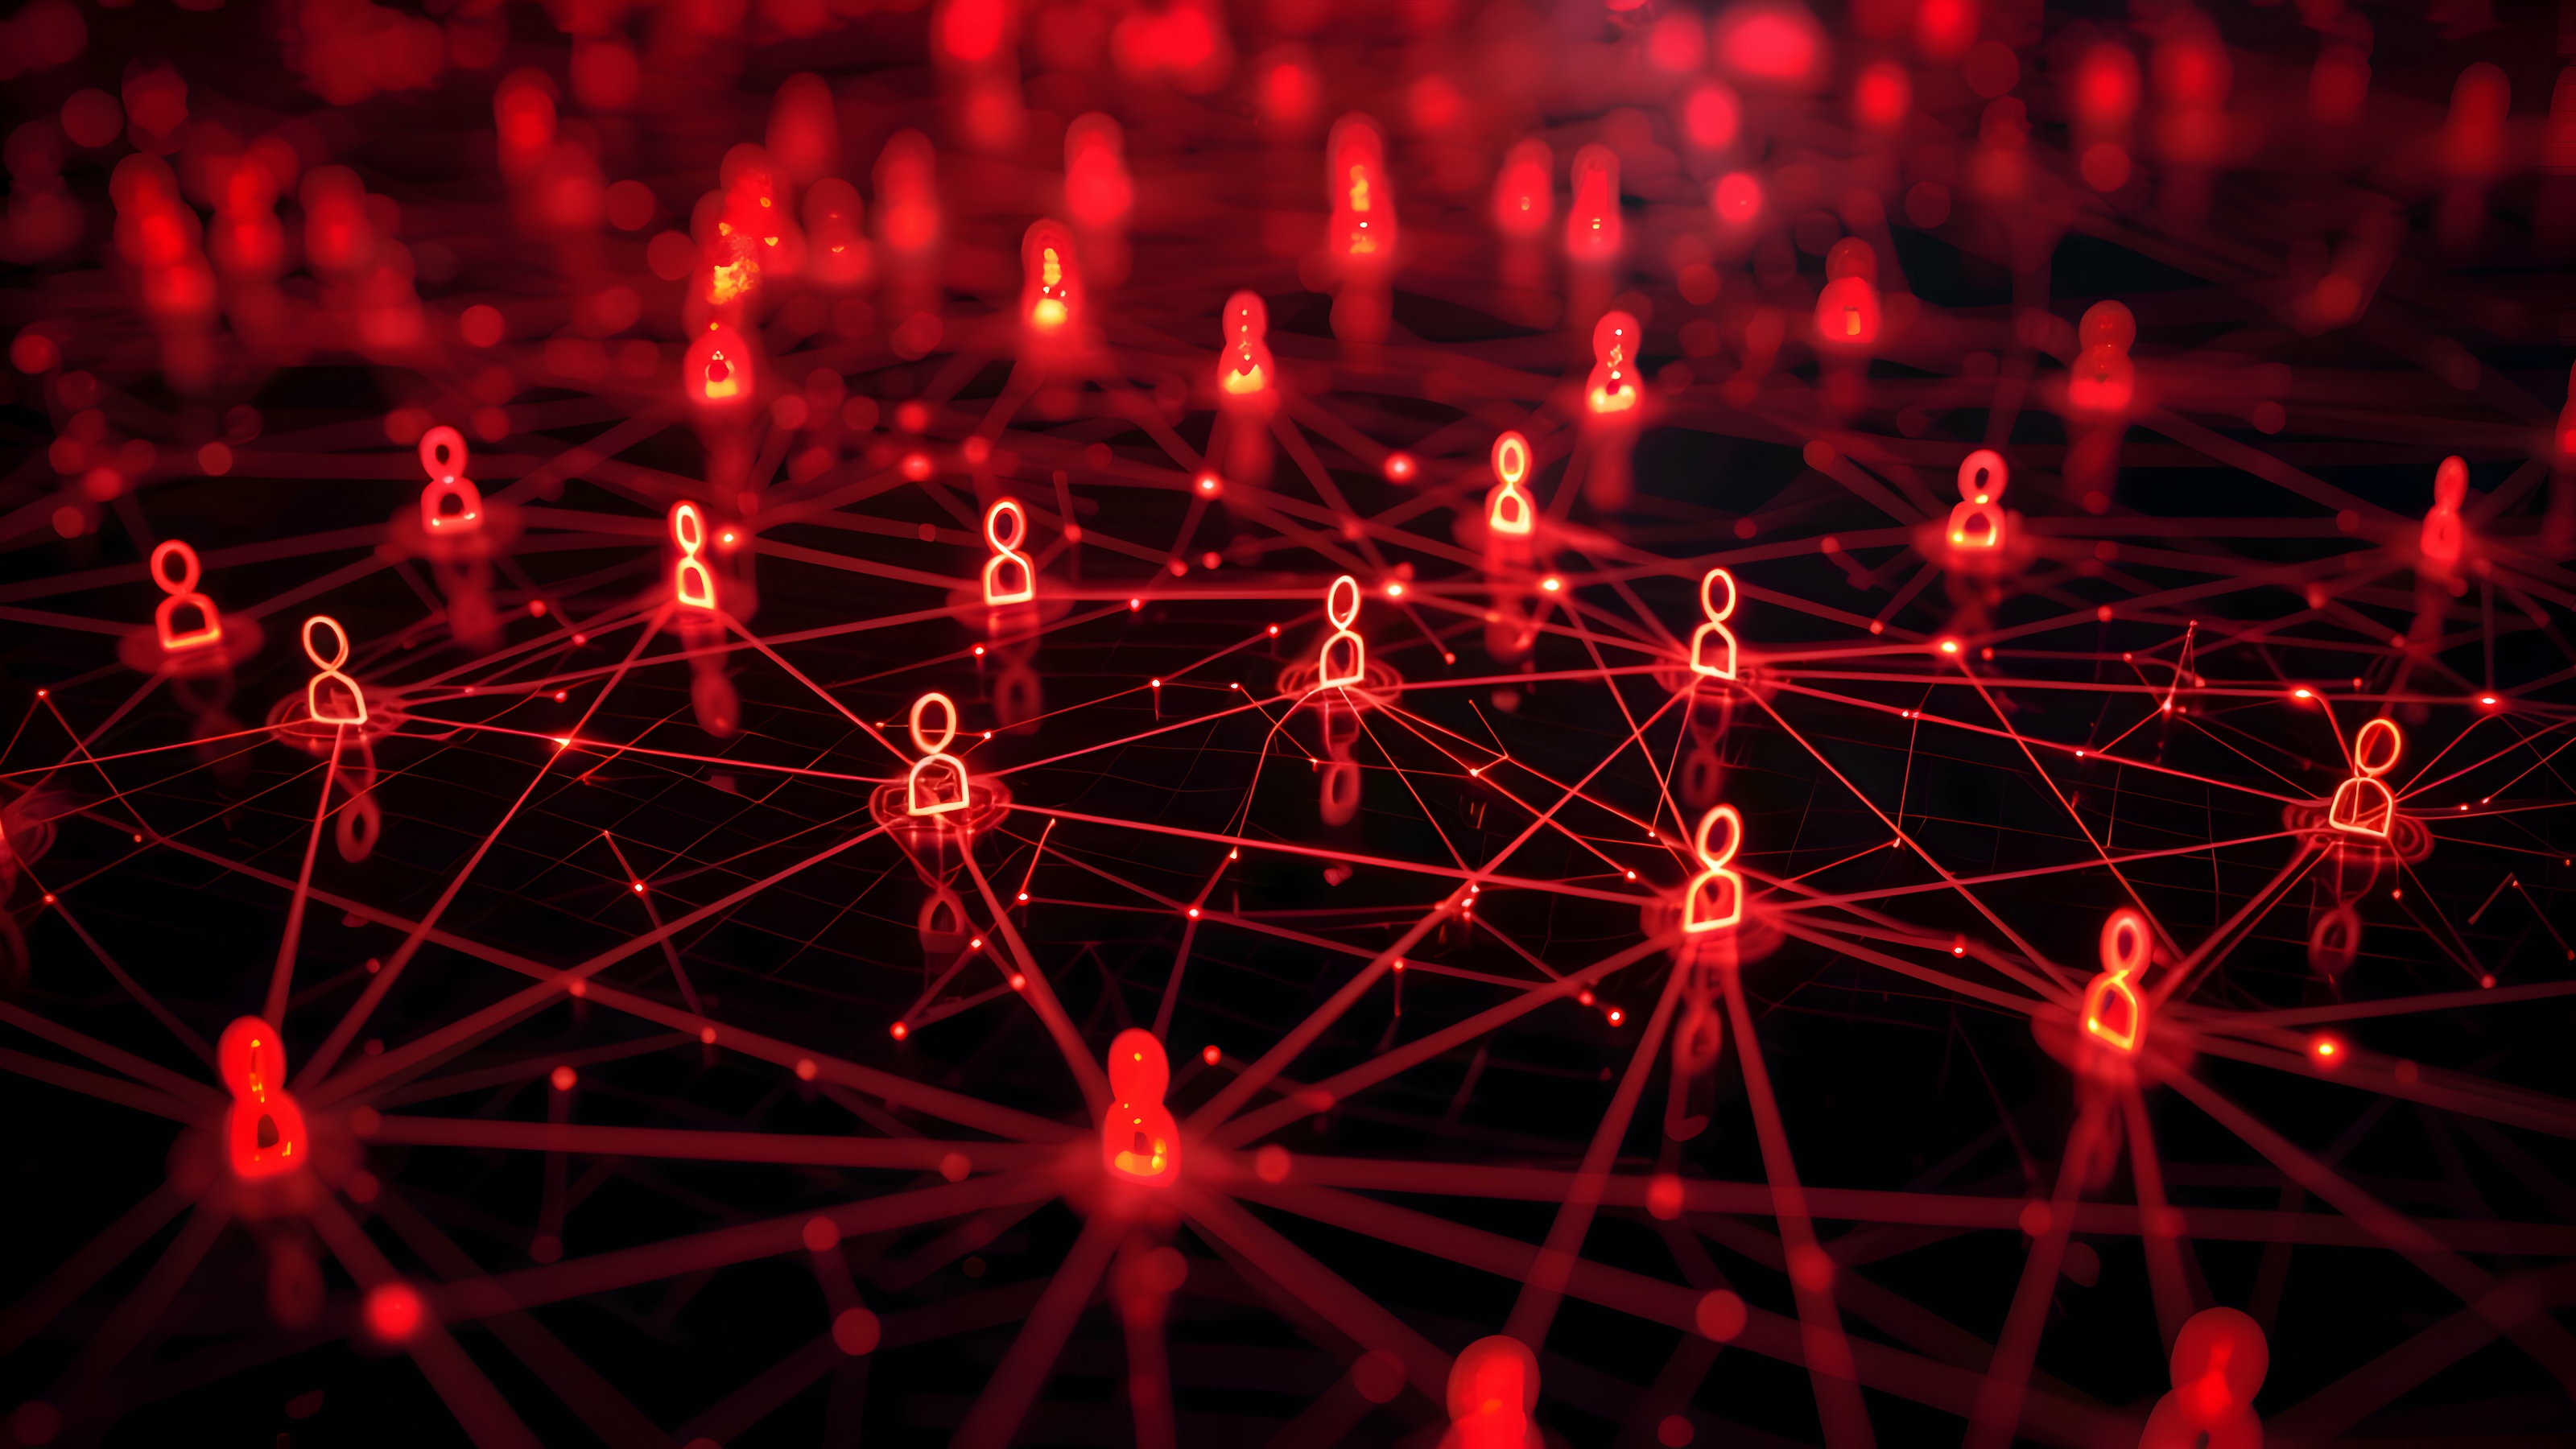 A digital network visualization with red person icons interconnected by lines symbolizes communication and connectivity. The background is dark with bright red lines forming a web-like structure, evoking the strategic mind of your inner CEO.